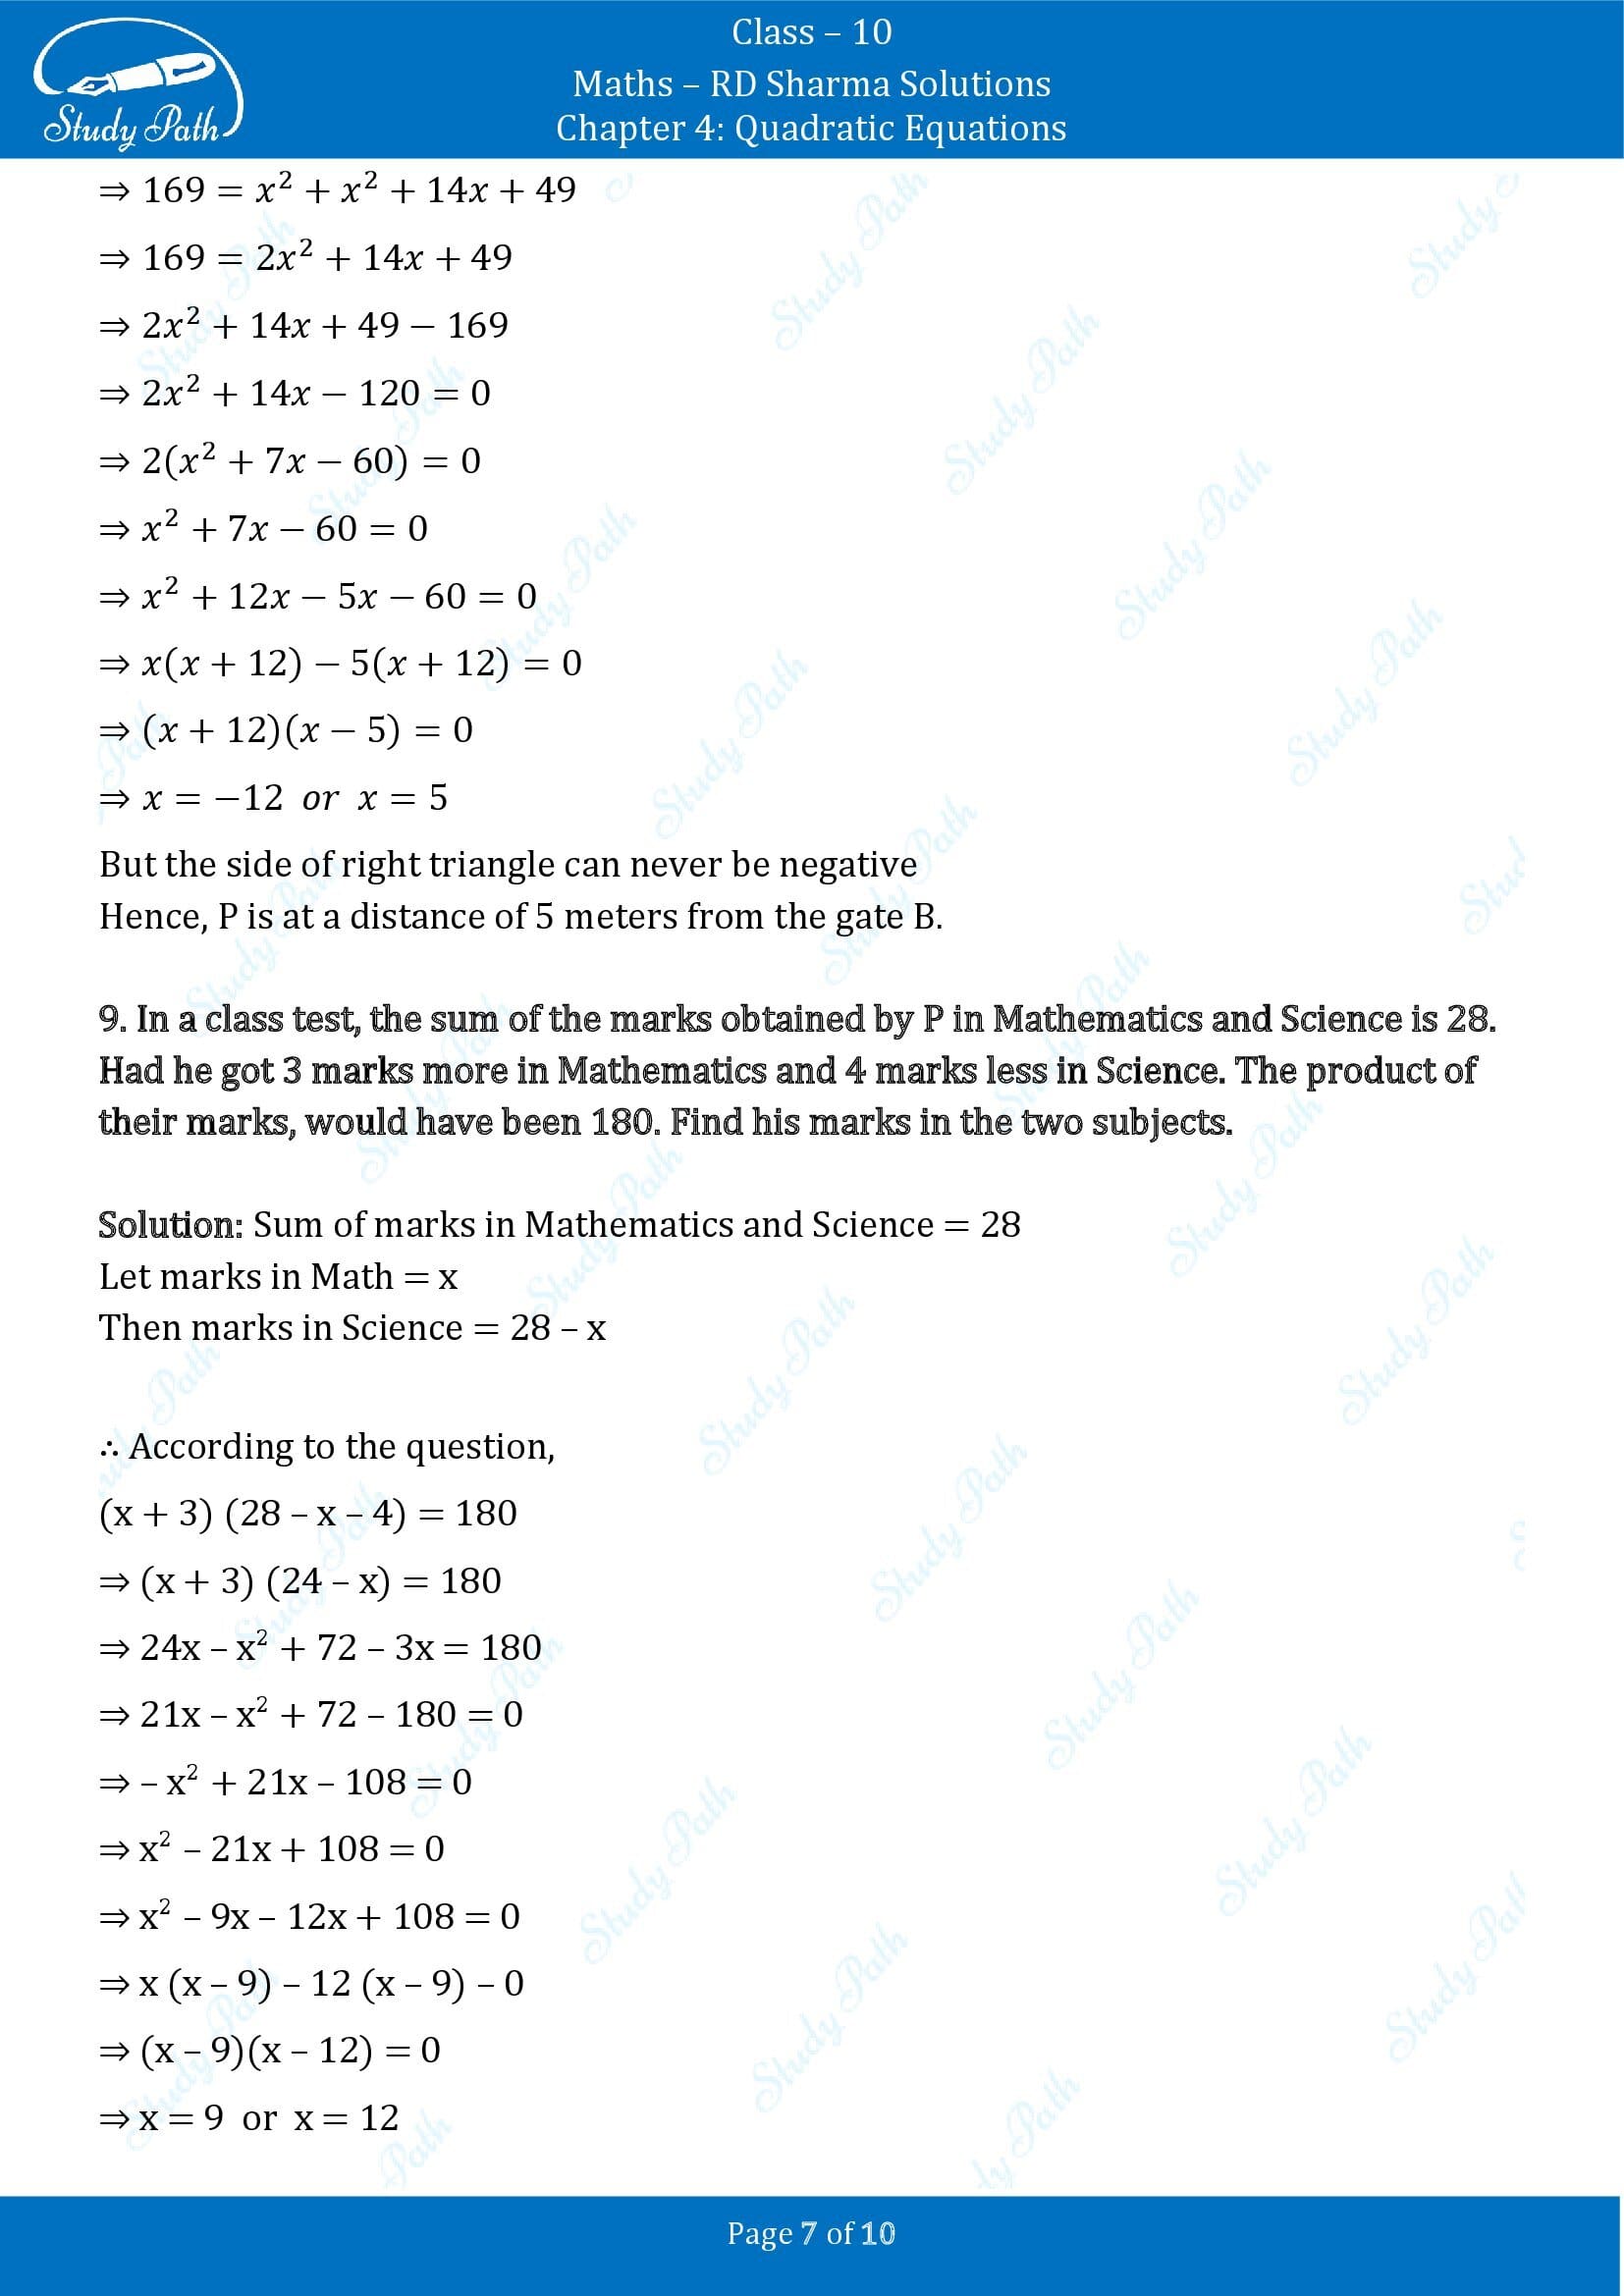 RD Sharma Solutions Class 10 Chapter 4 Quadratic Equations Exercise 4.13 00007